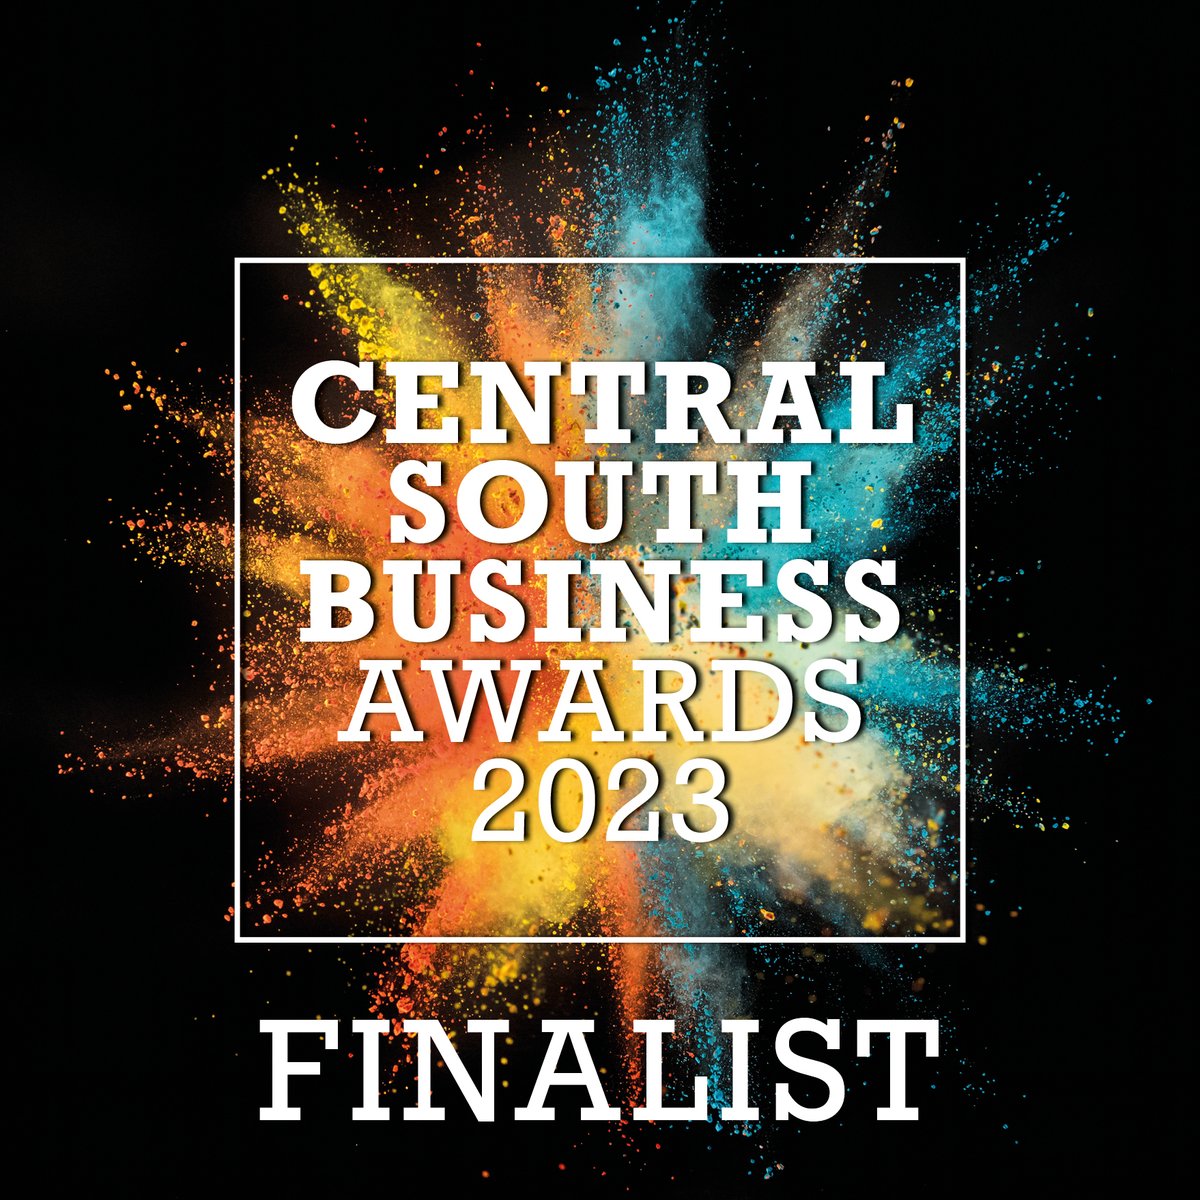 Pleased to announce Gold-i is a finalist for the Central South Business Awards for Employer of the Year 🎉

#CSBAwards #Awards #EmployeroftheYear #CentralSouthUK